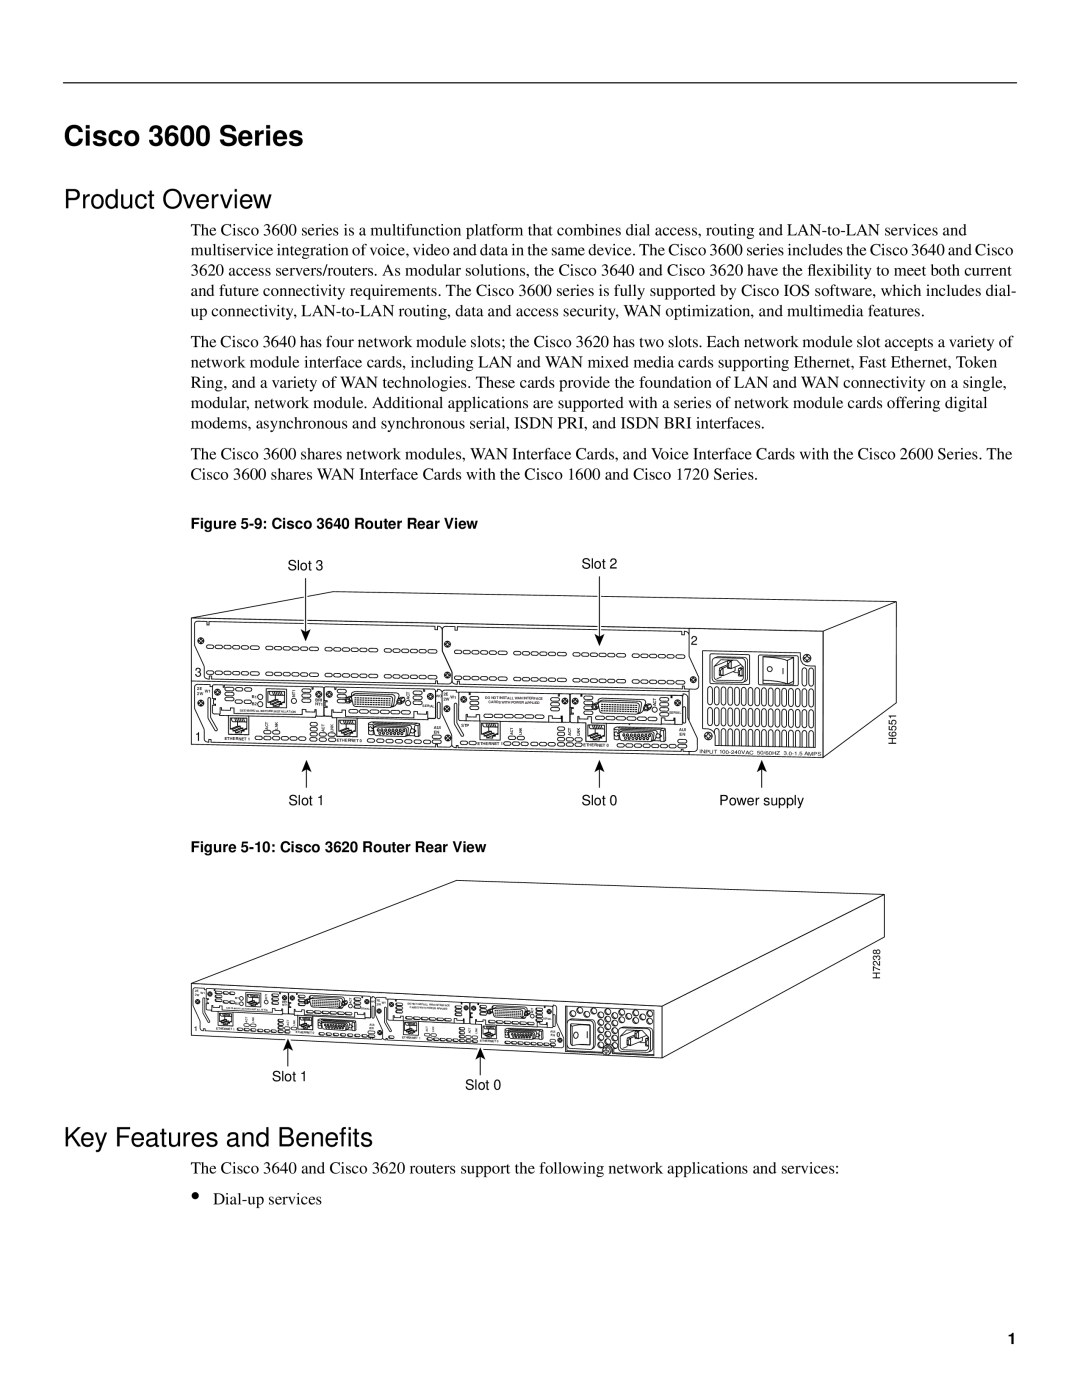 Cisco Systems manual Product Overview, Key Features and Beneﬁts, Cisco 3600 Series 